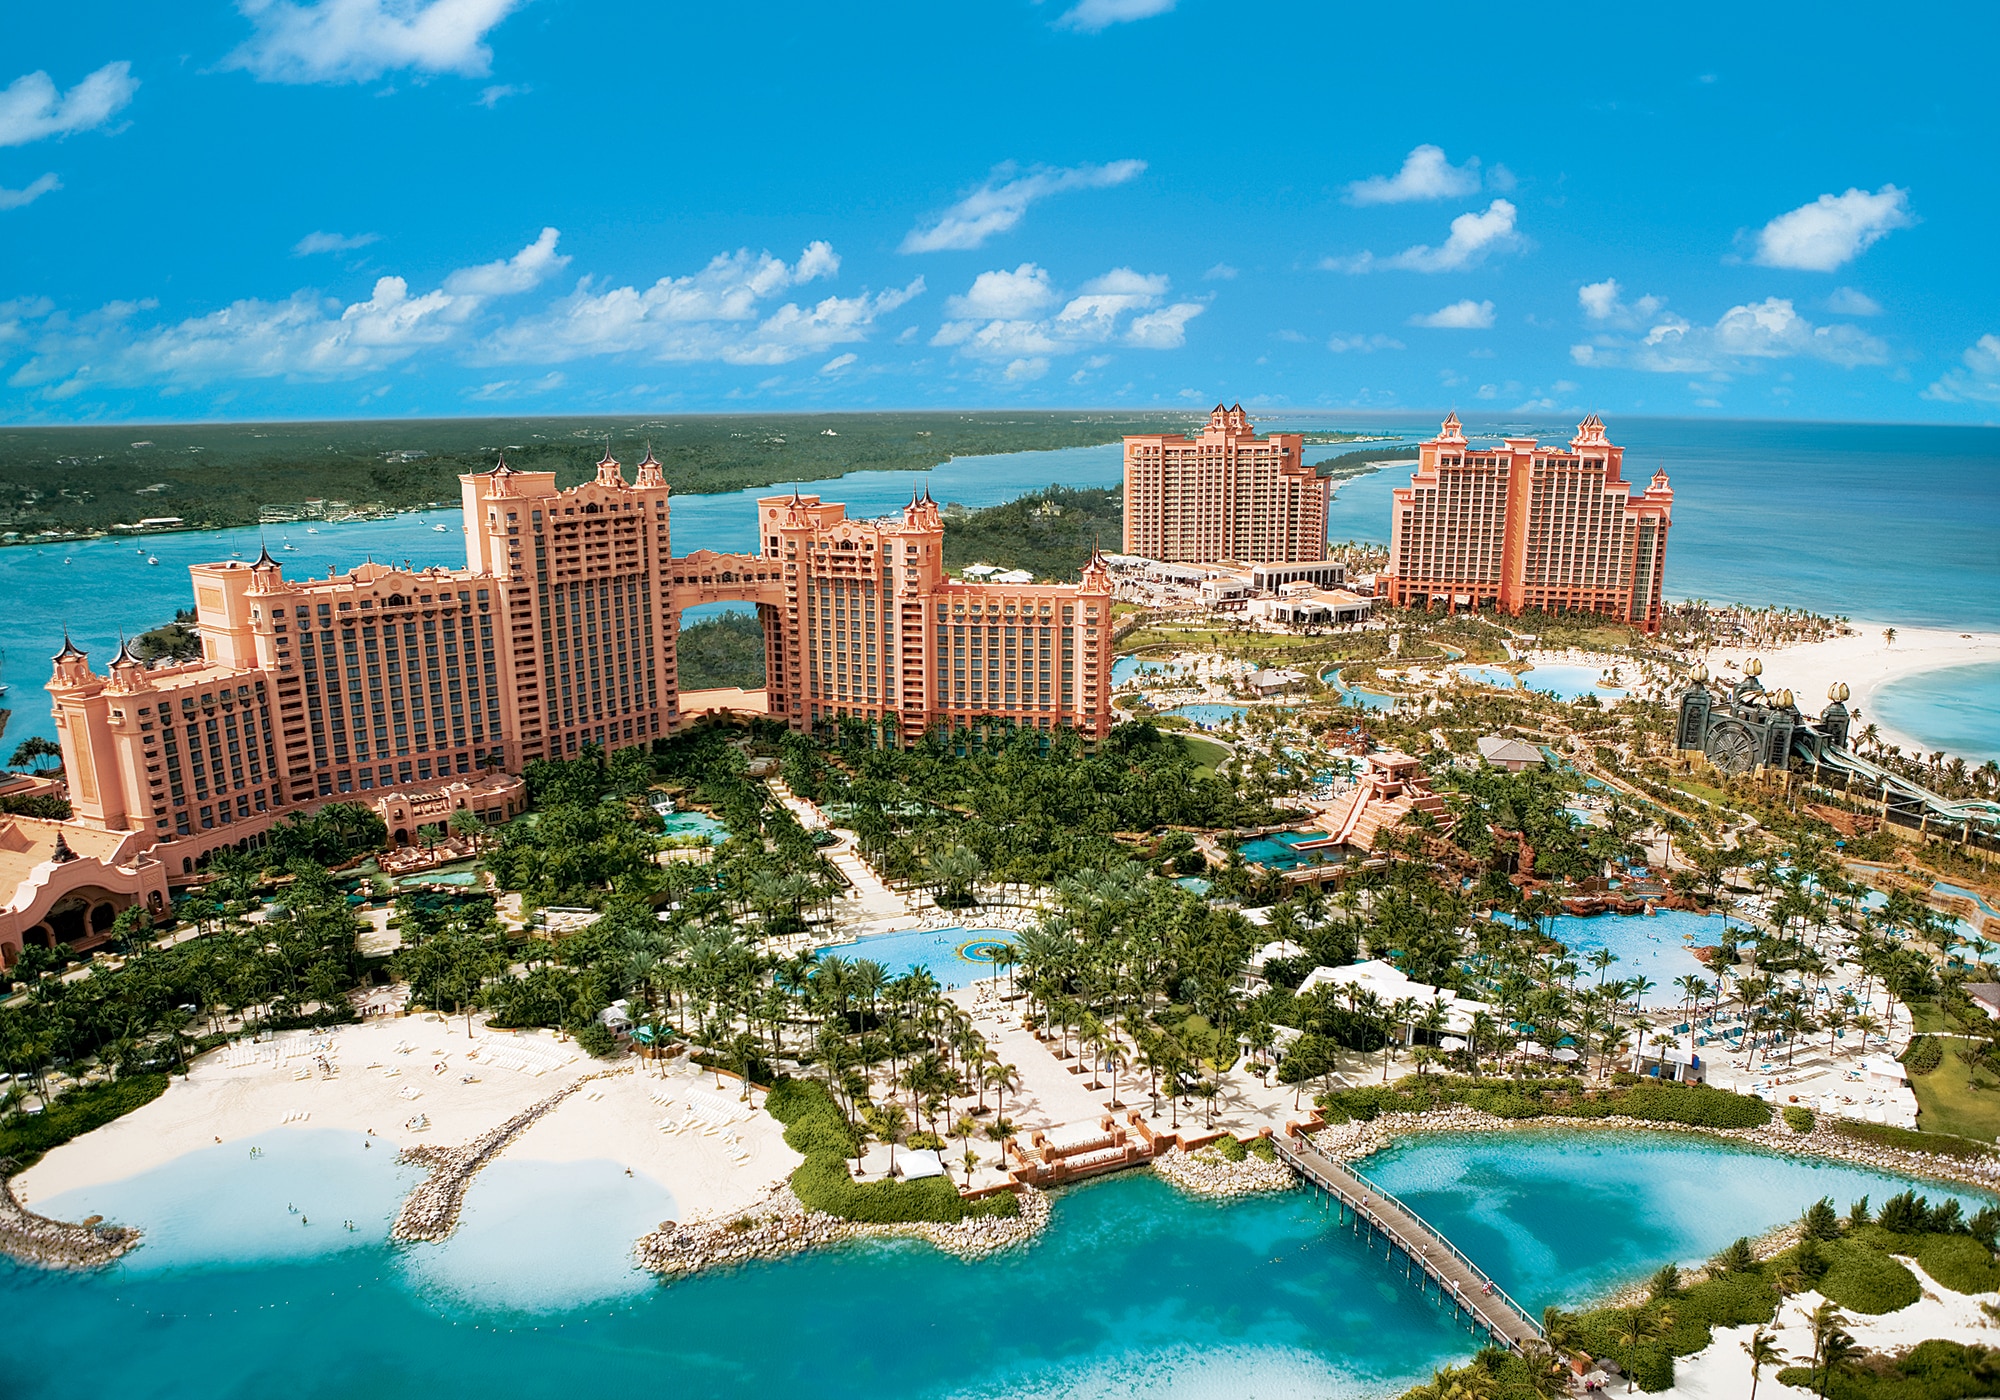 An aerial view of Atlantis Paradise Island in the Bahamas.